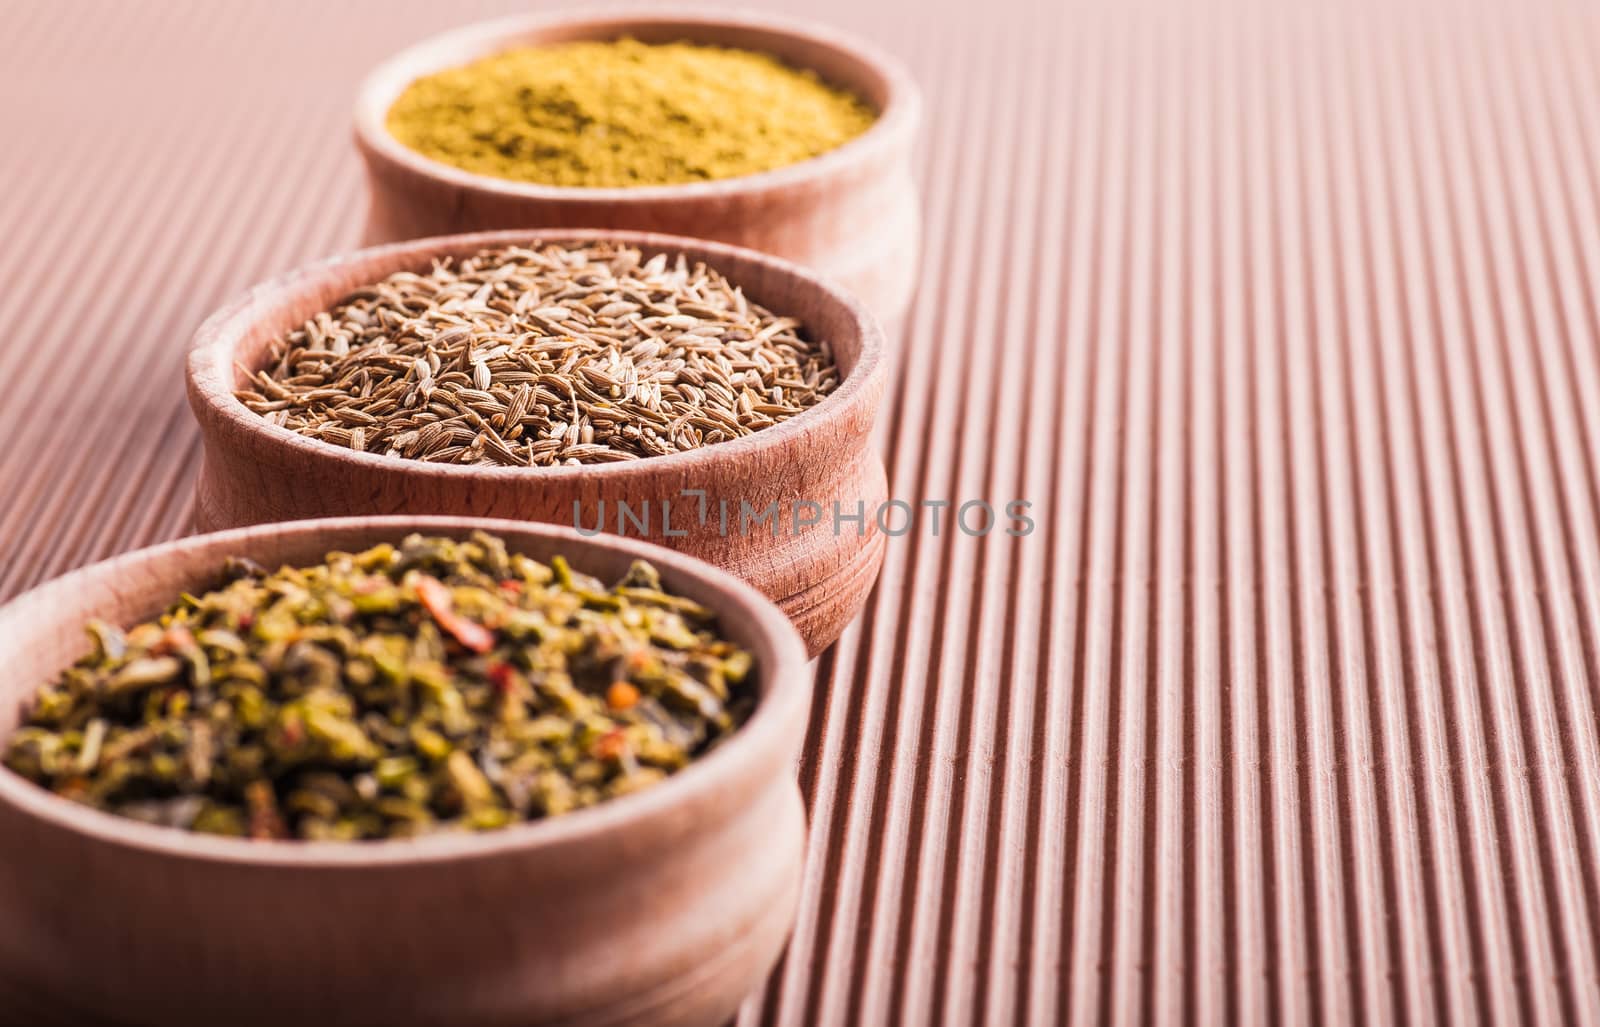 cumin,hops-suneli,paprika in a wooden bowl close-up on a brown background